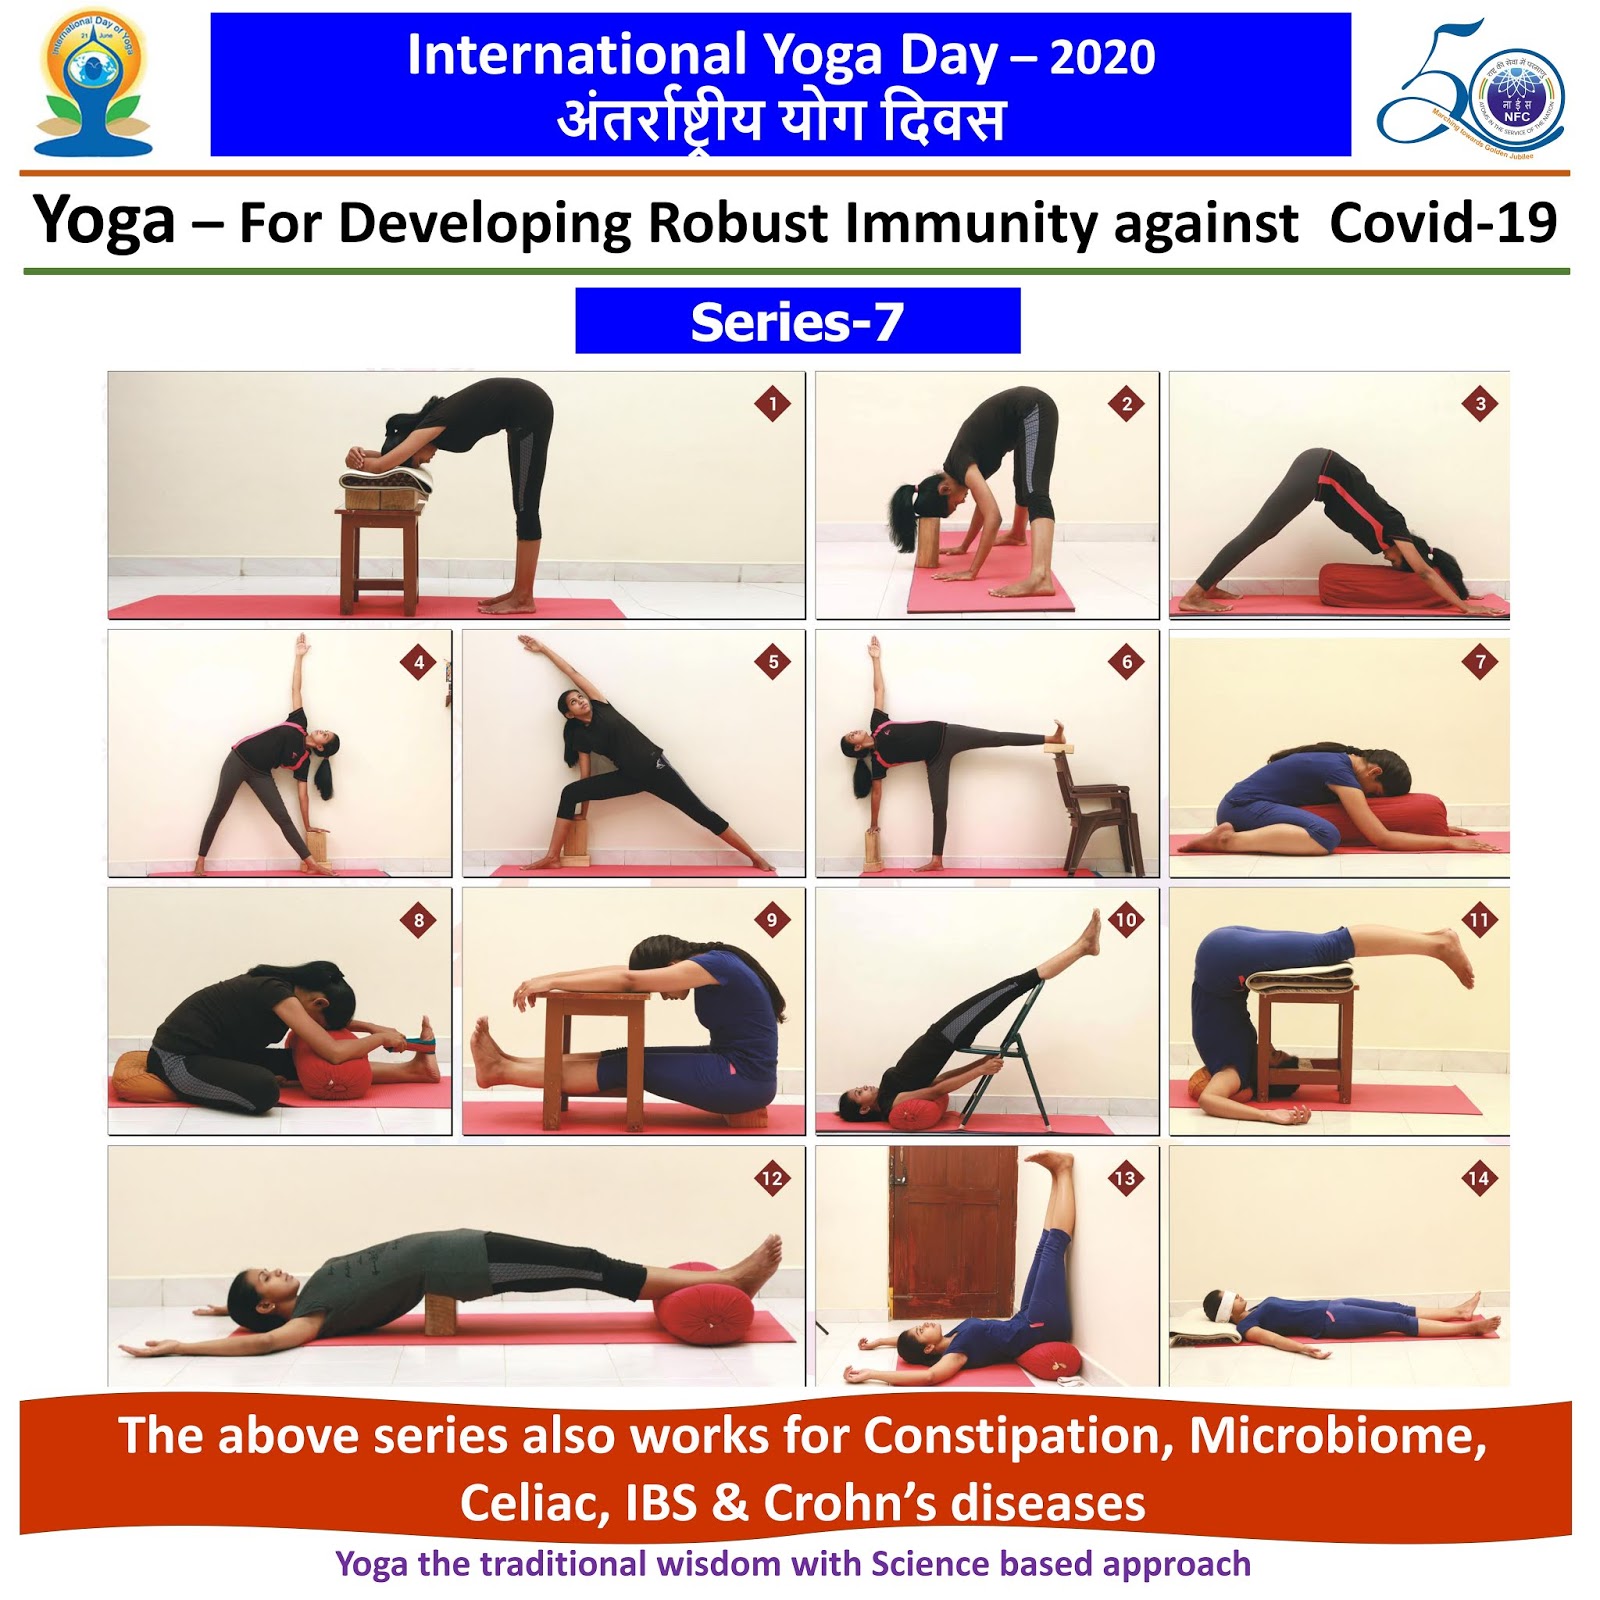 Happy International Yoga Day ... This series also works for Constipation, Microbiome, Celiac, IBS & Crohns diseases